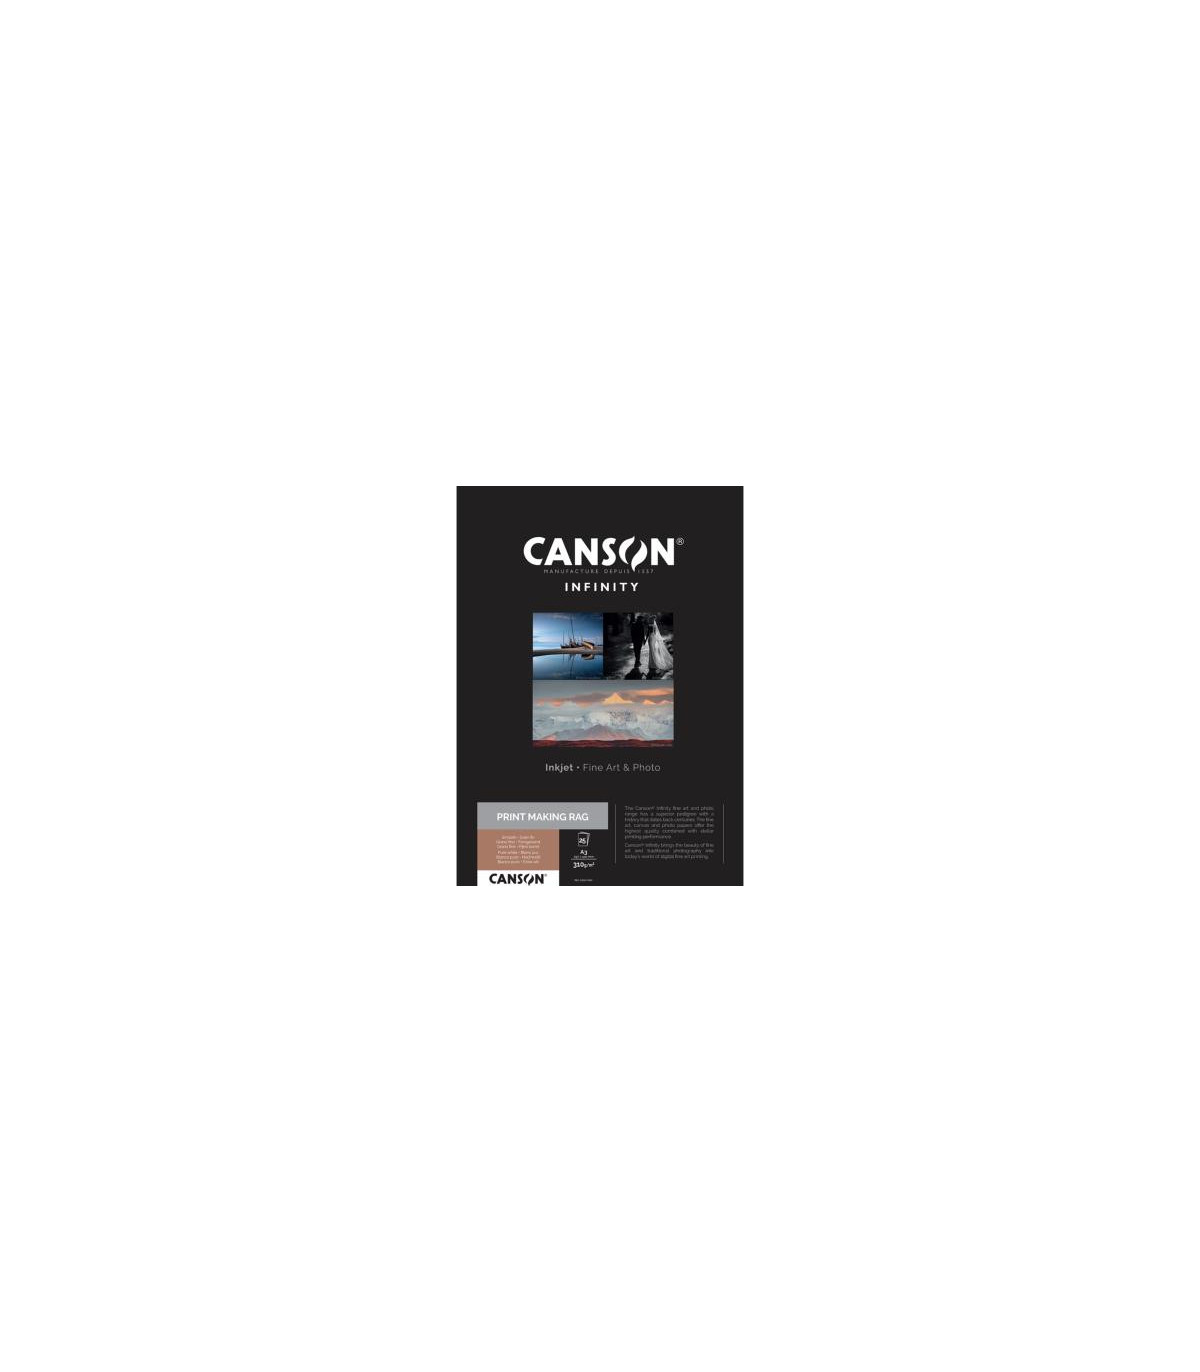 Canson Infinity Printmaking Rag A3 310g / 25 feuilles - Agréé Digigraphie -  Prophot